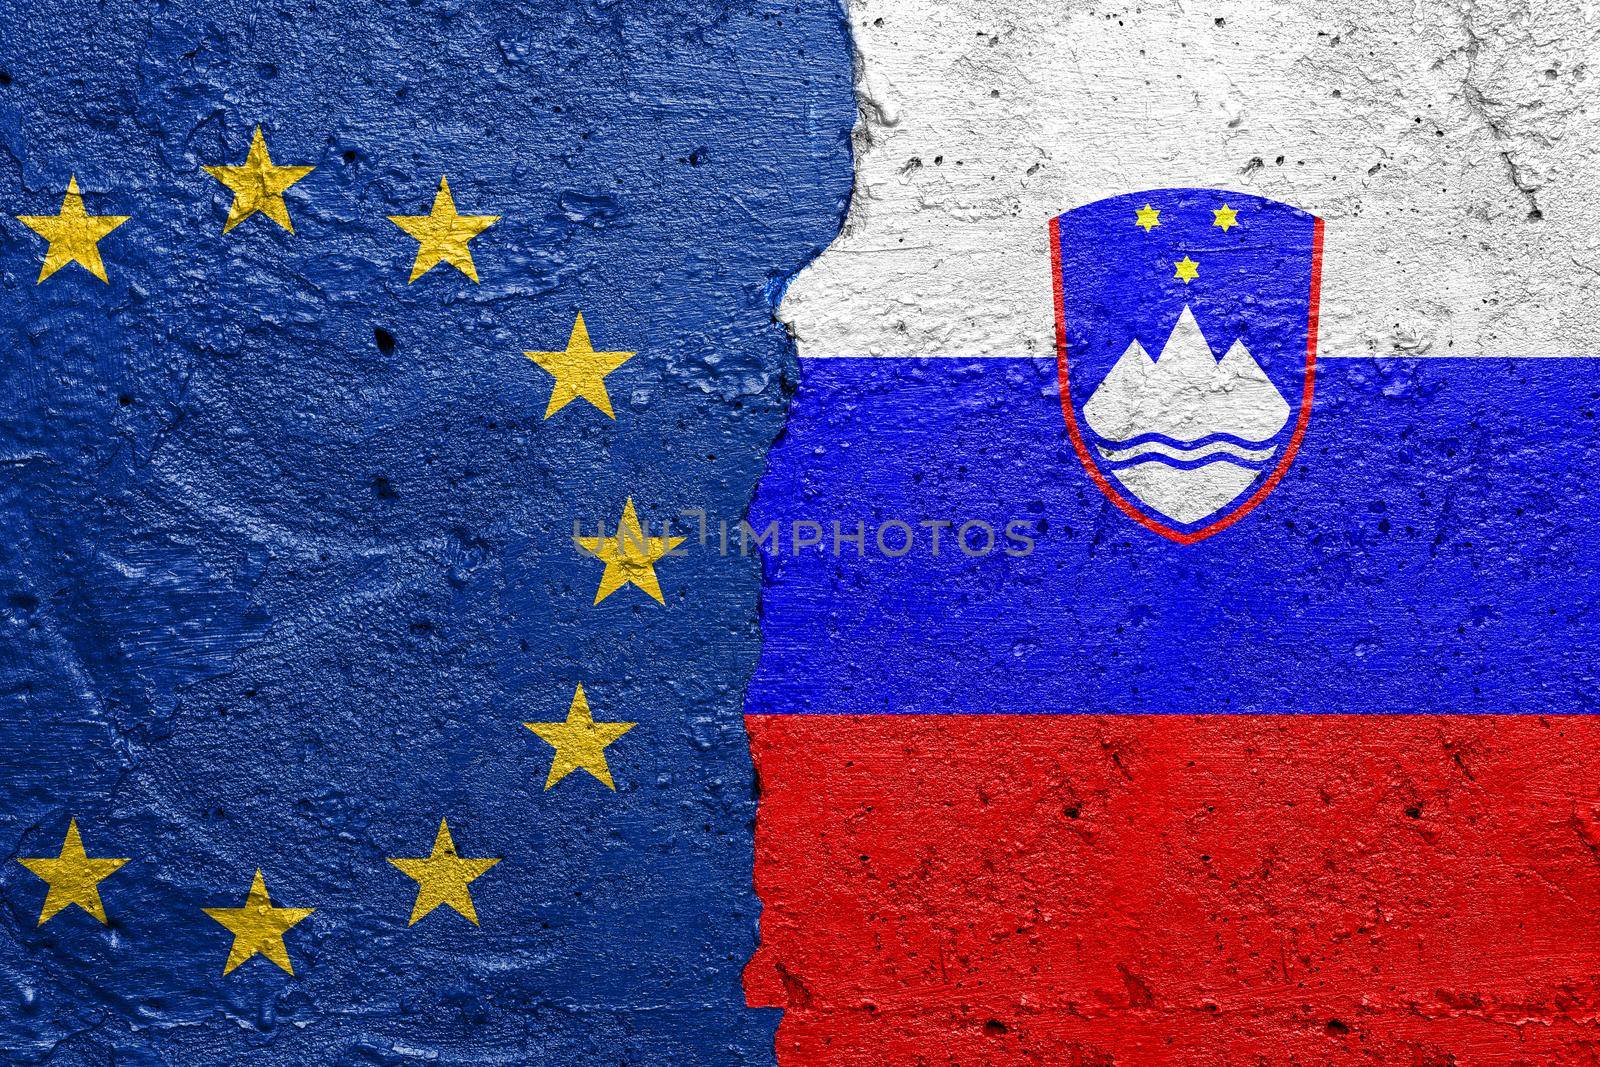 European Union EU and Slovenia - Cracked concrete wall painted with a EU flag on the left and a Slovanian flag on the right stock photo by adamr